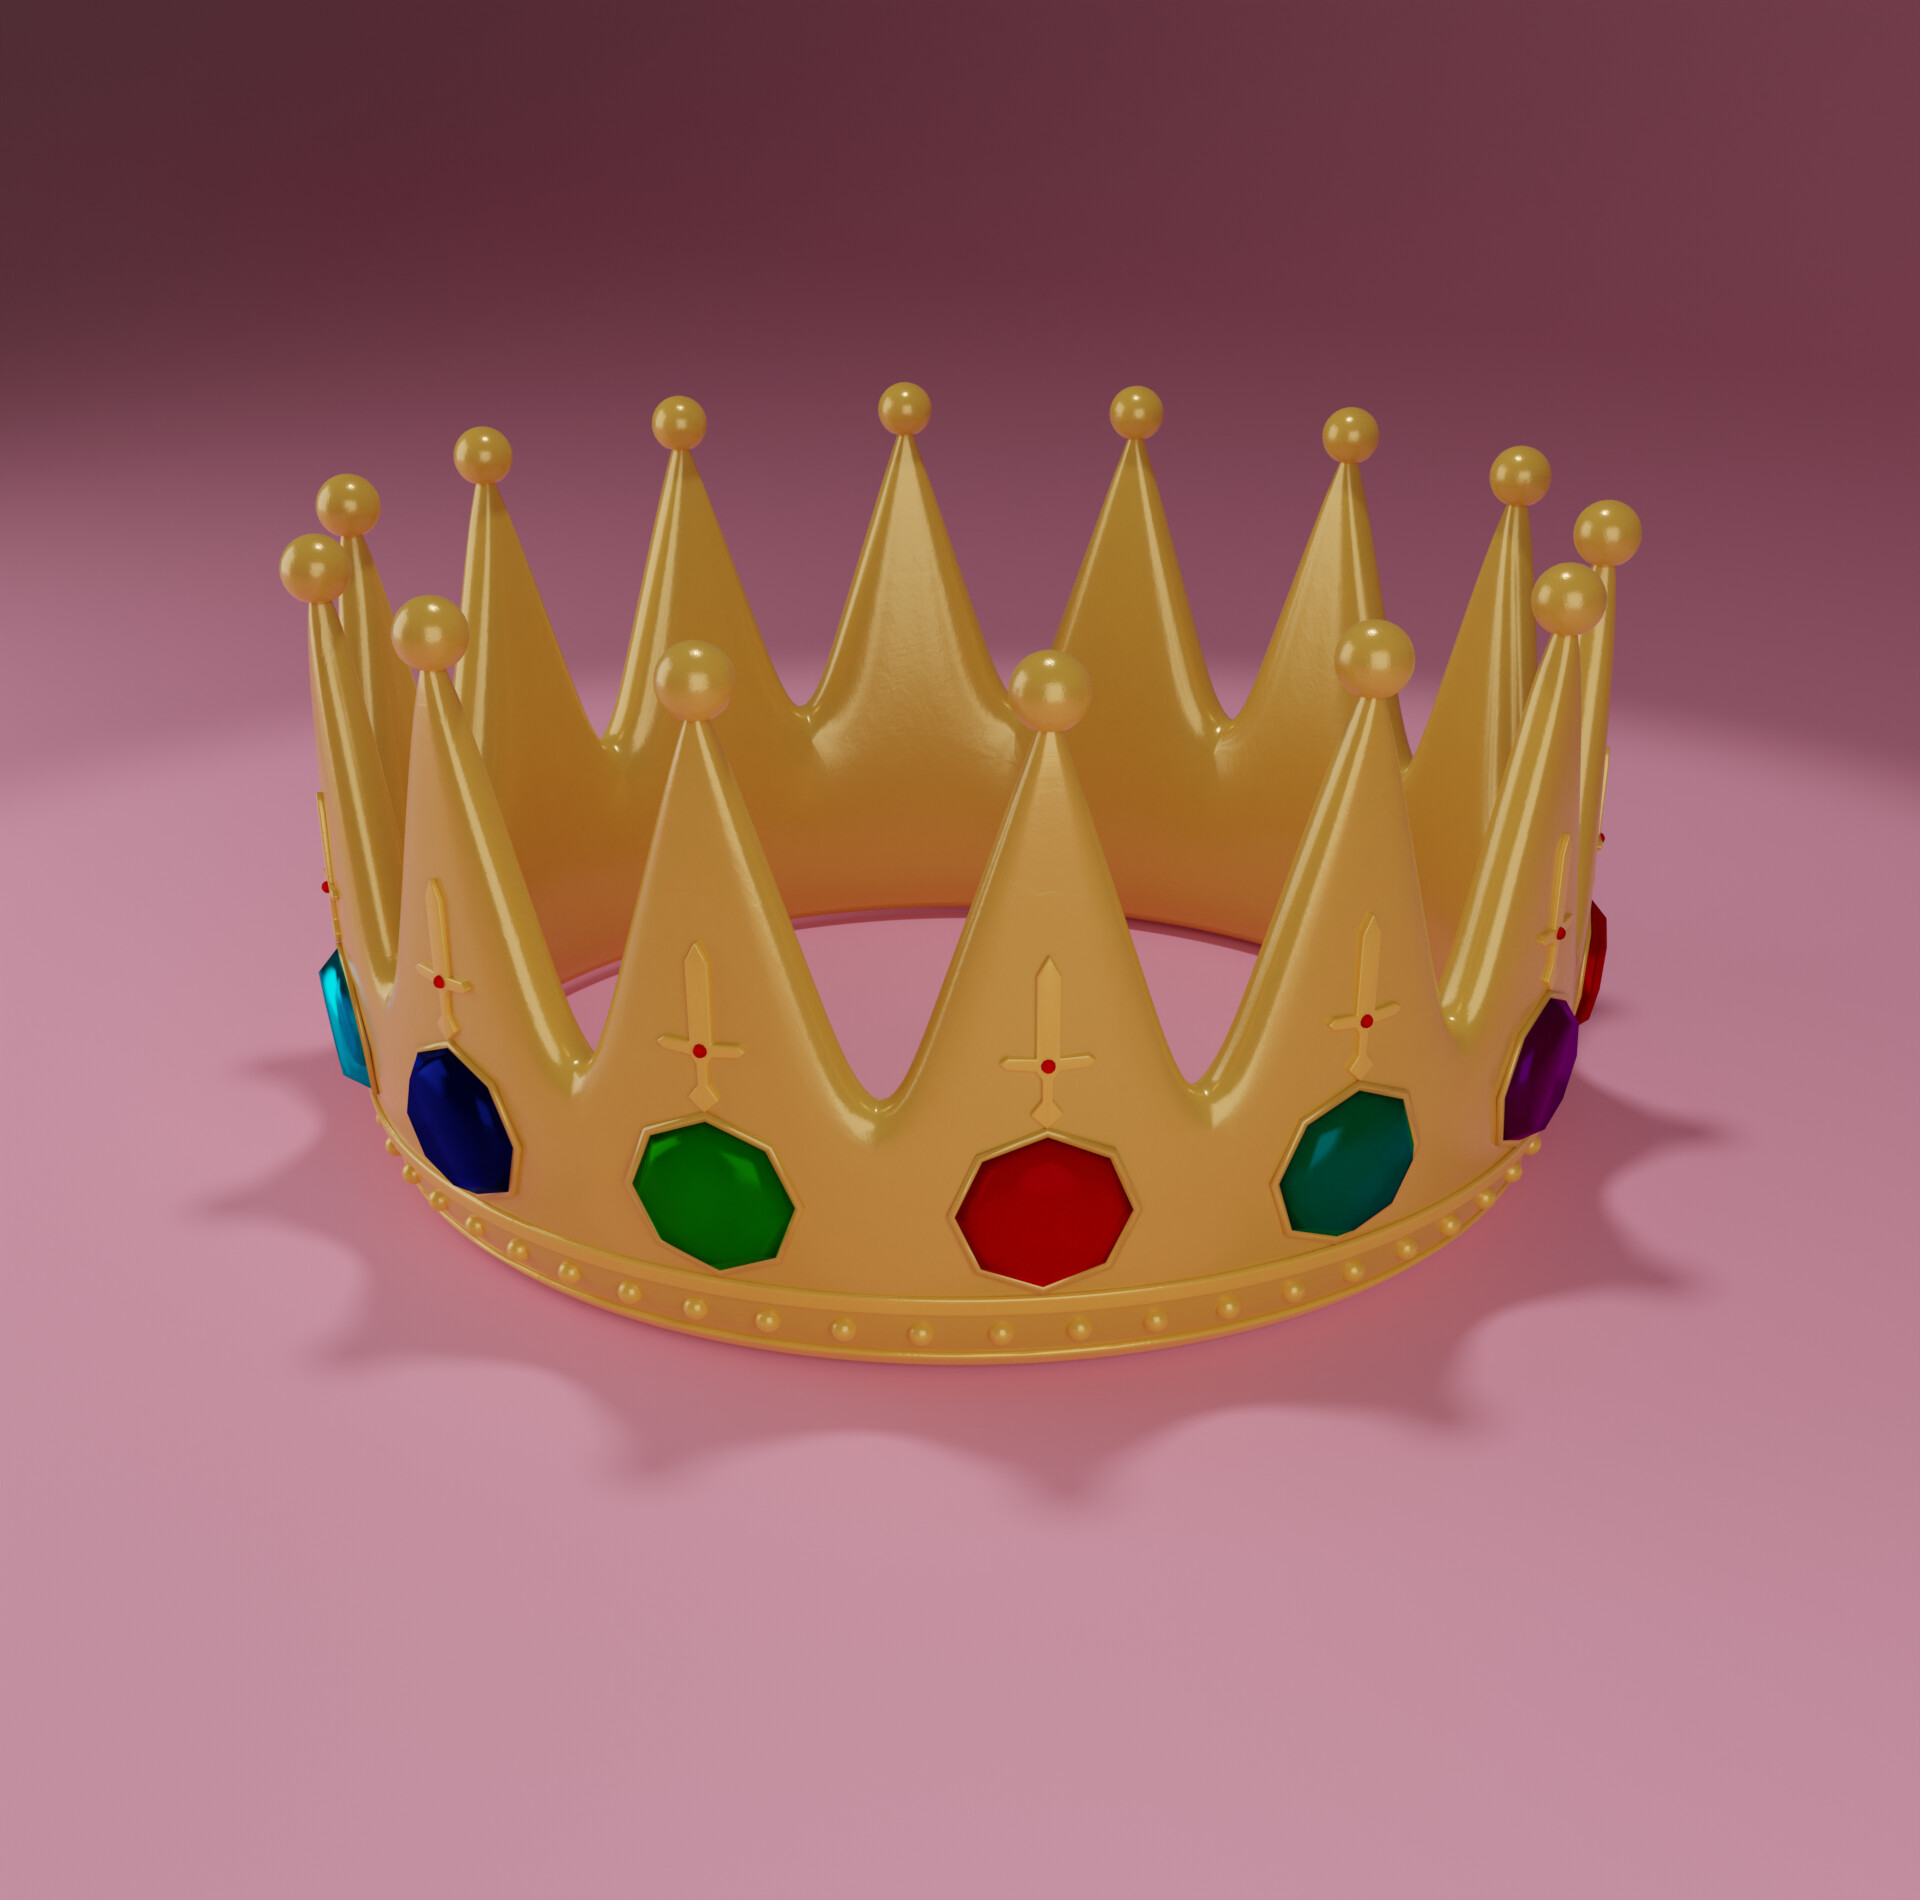 technoblade crown meaning｜TikTok Search